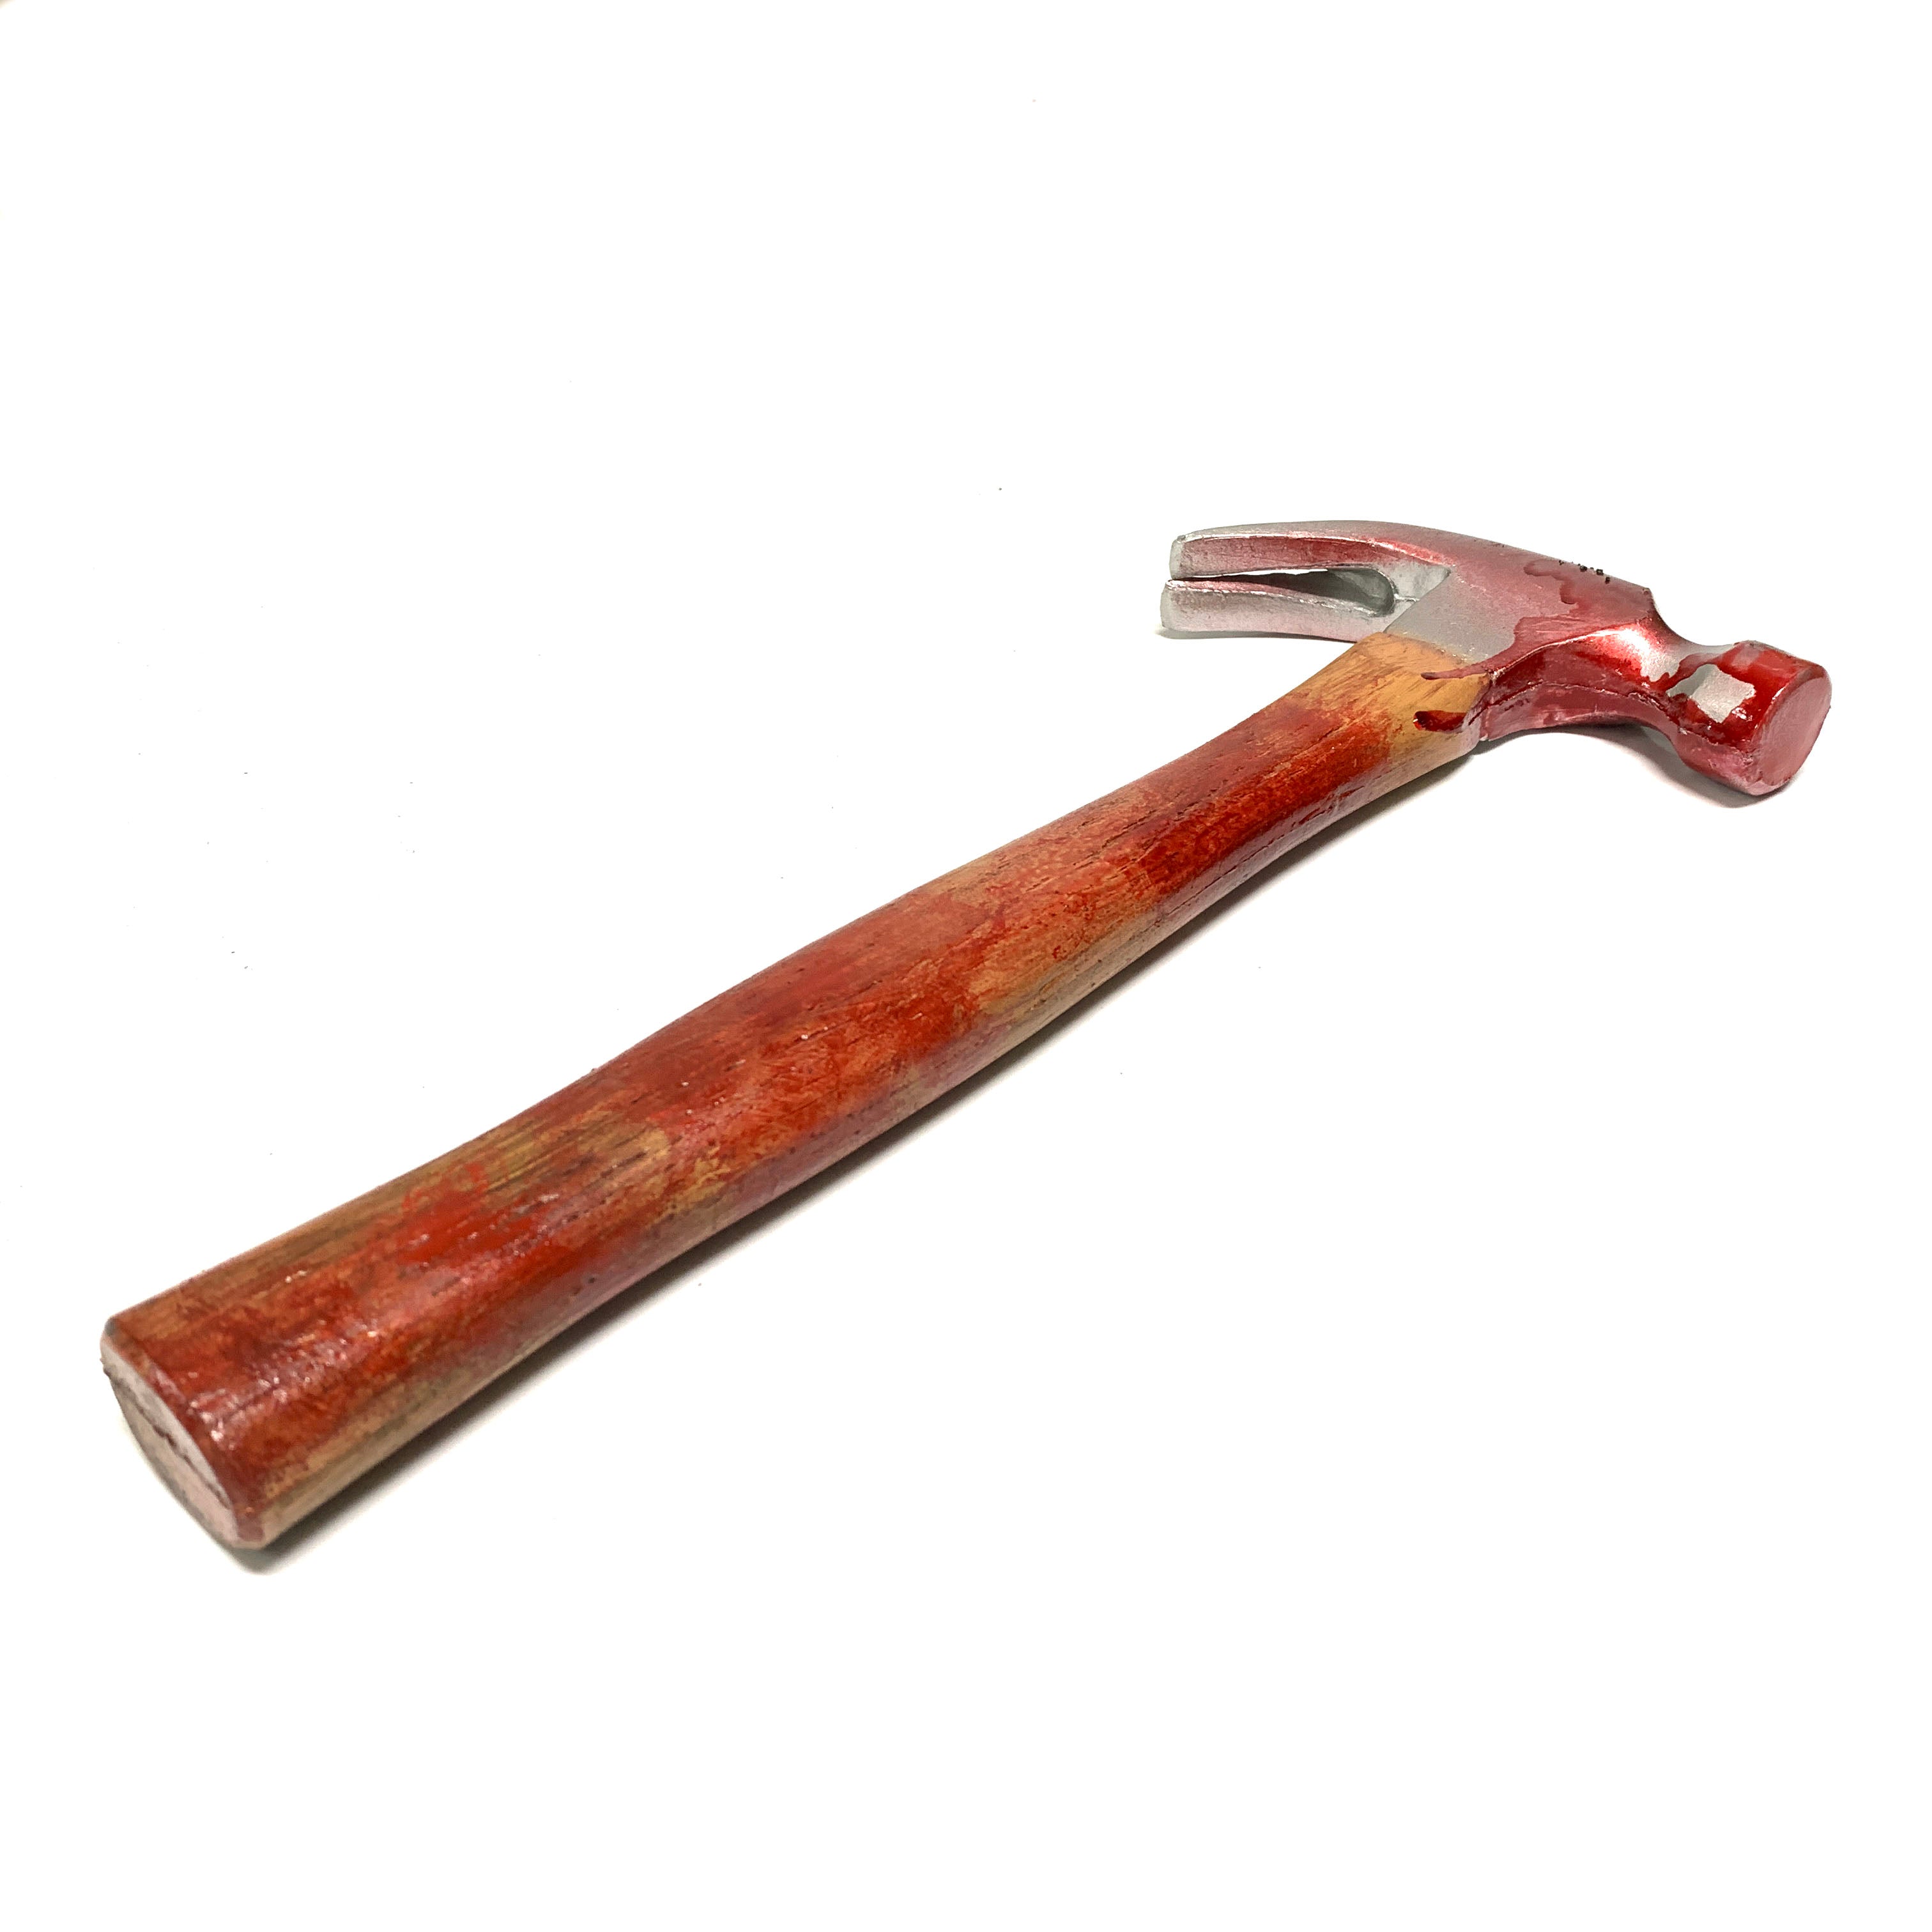 Foam Rubber Standard Claw Hammer Stunt Prop - BLOODY - Bloodied Silver Head with Aged Handle